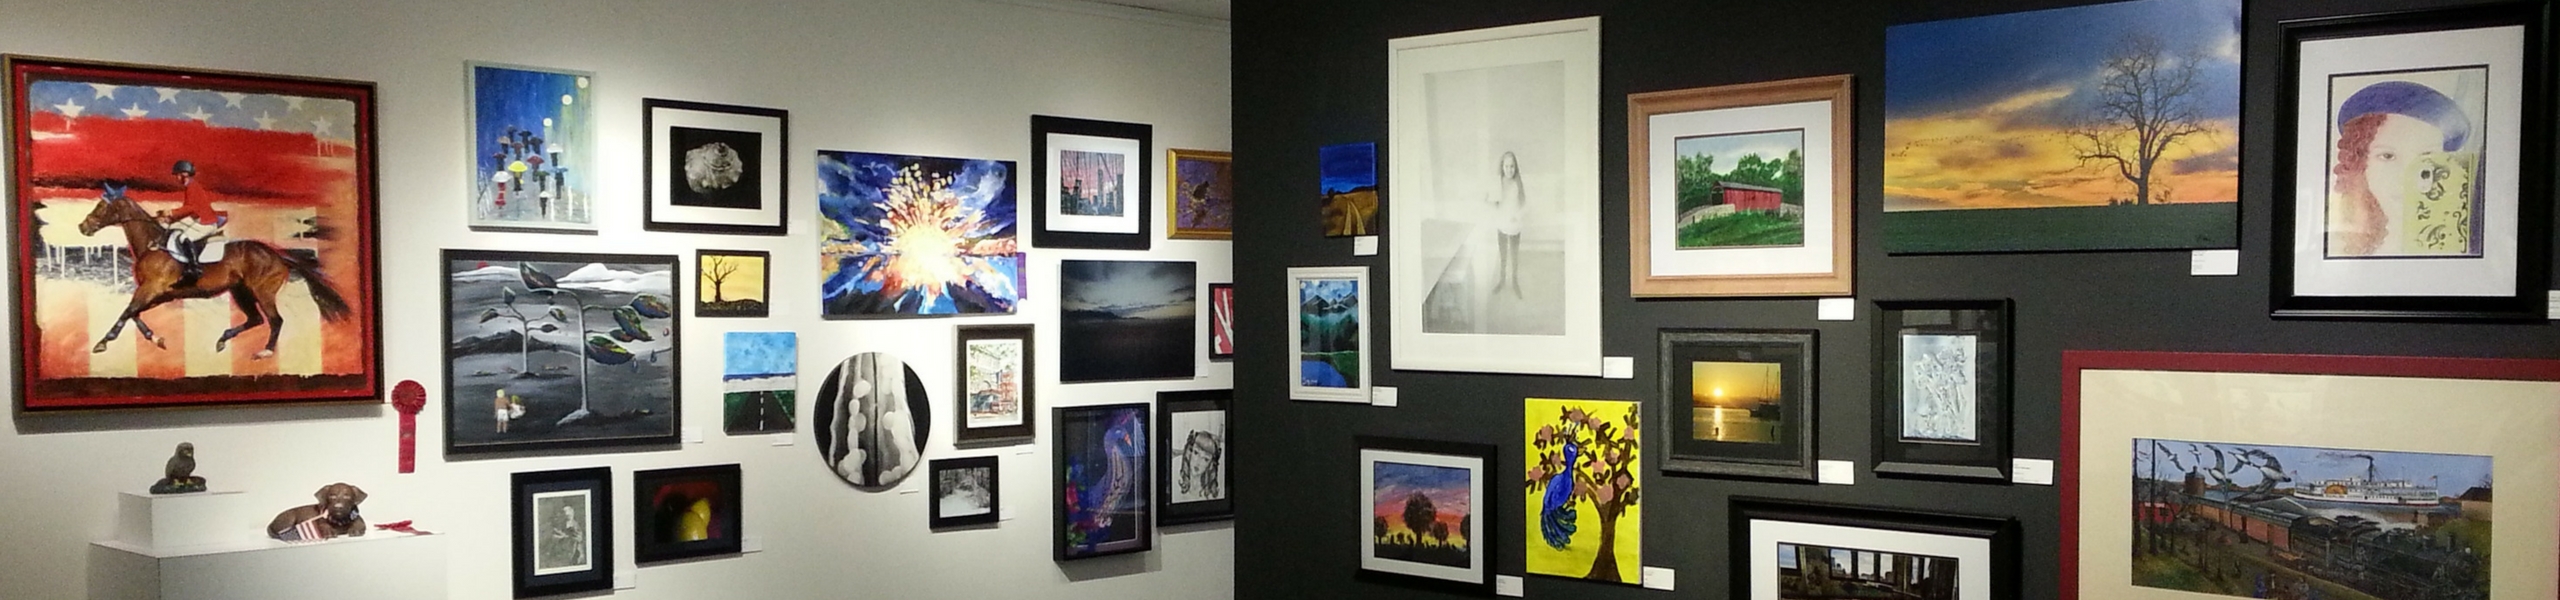 11th Annual Delaware State Employee Art Exhibition: Registration Now Open